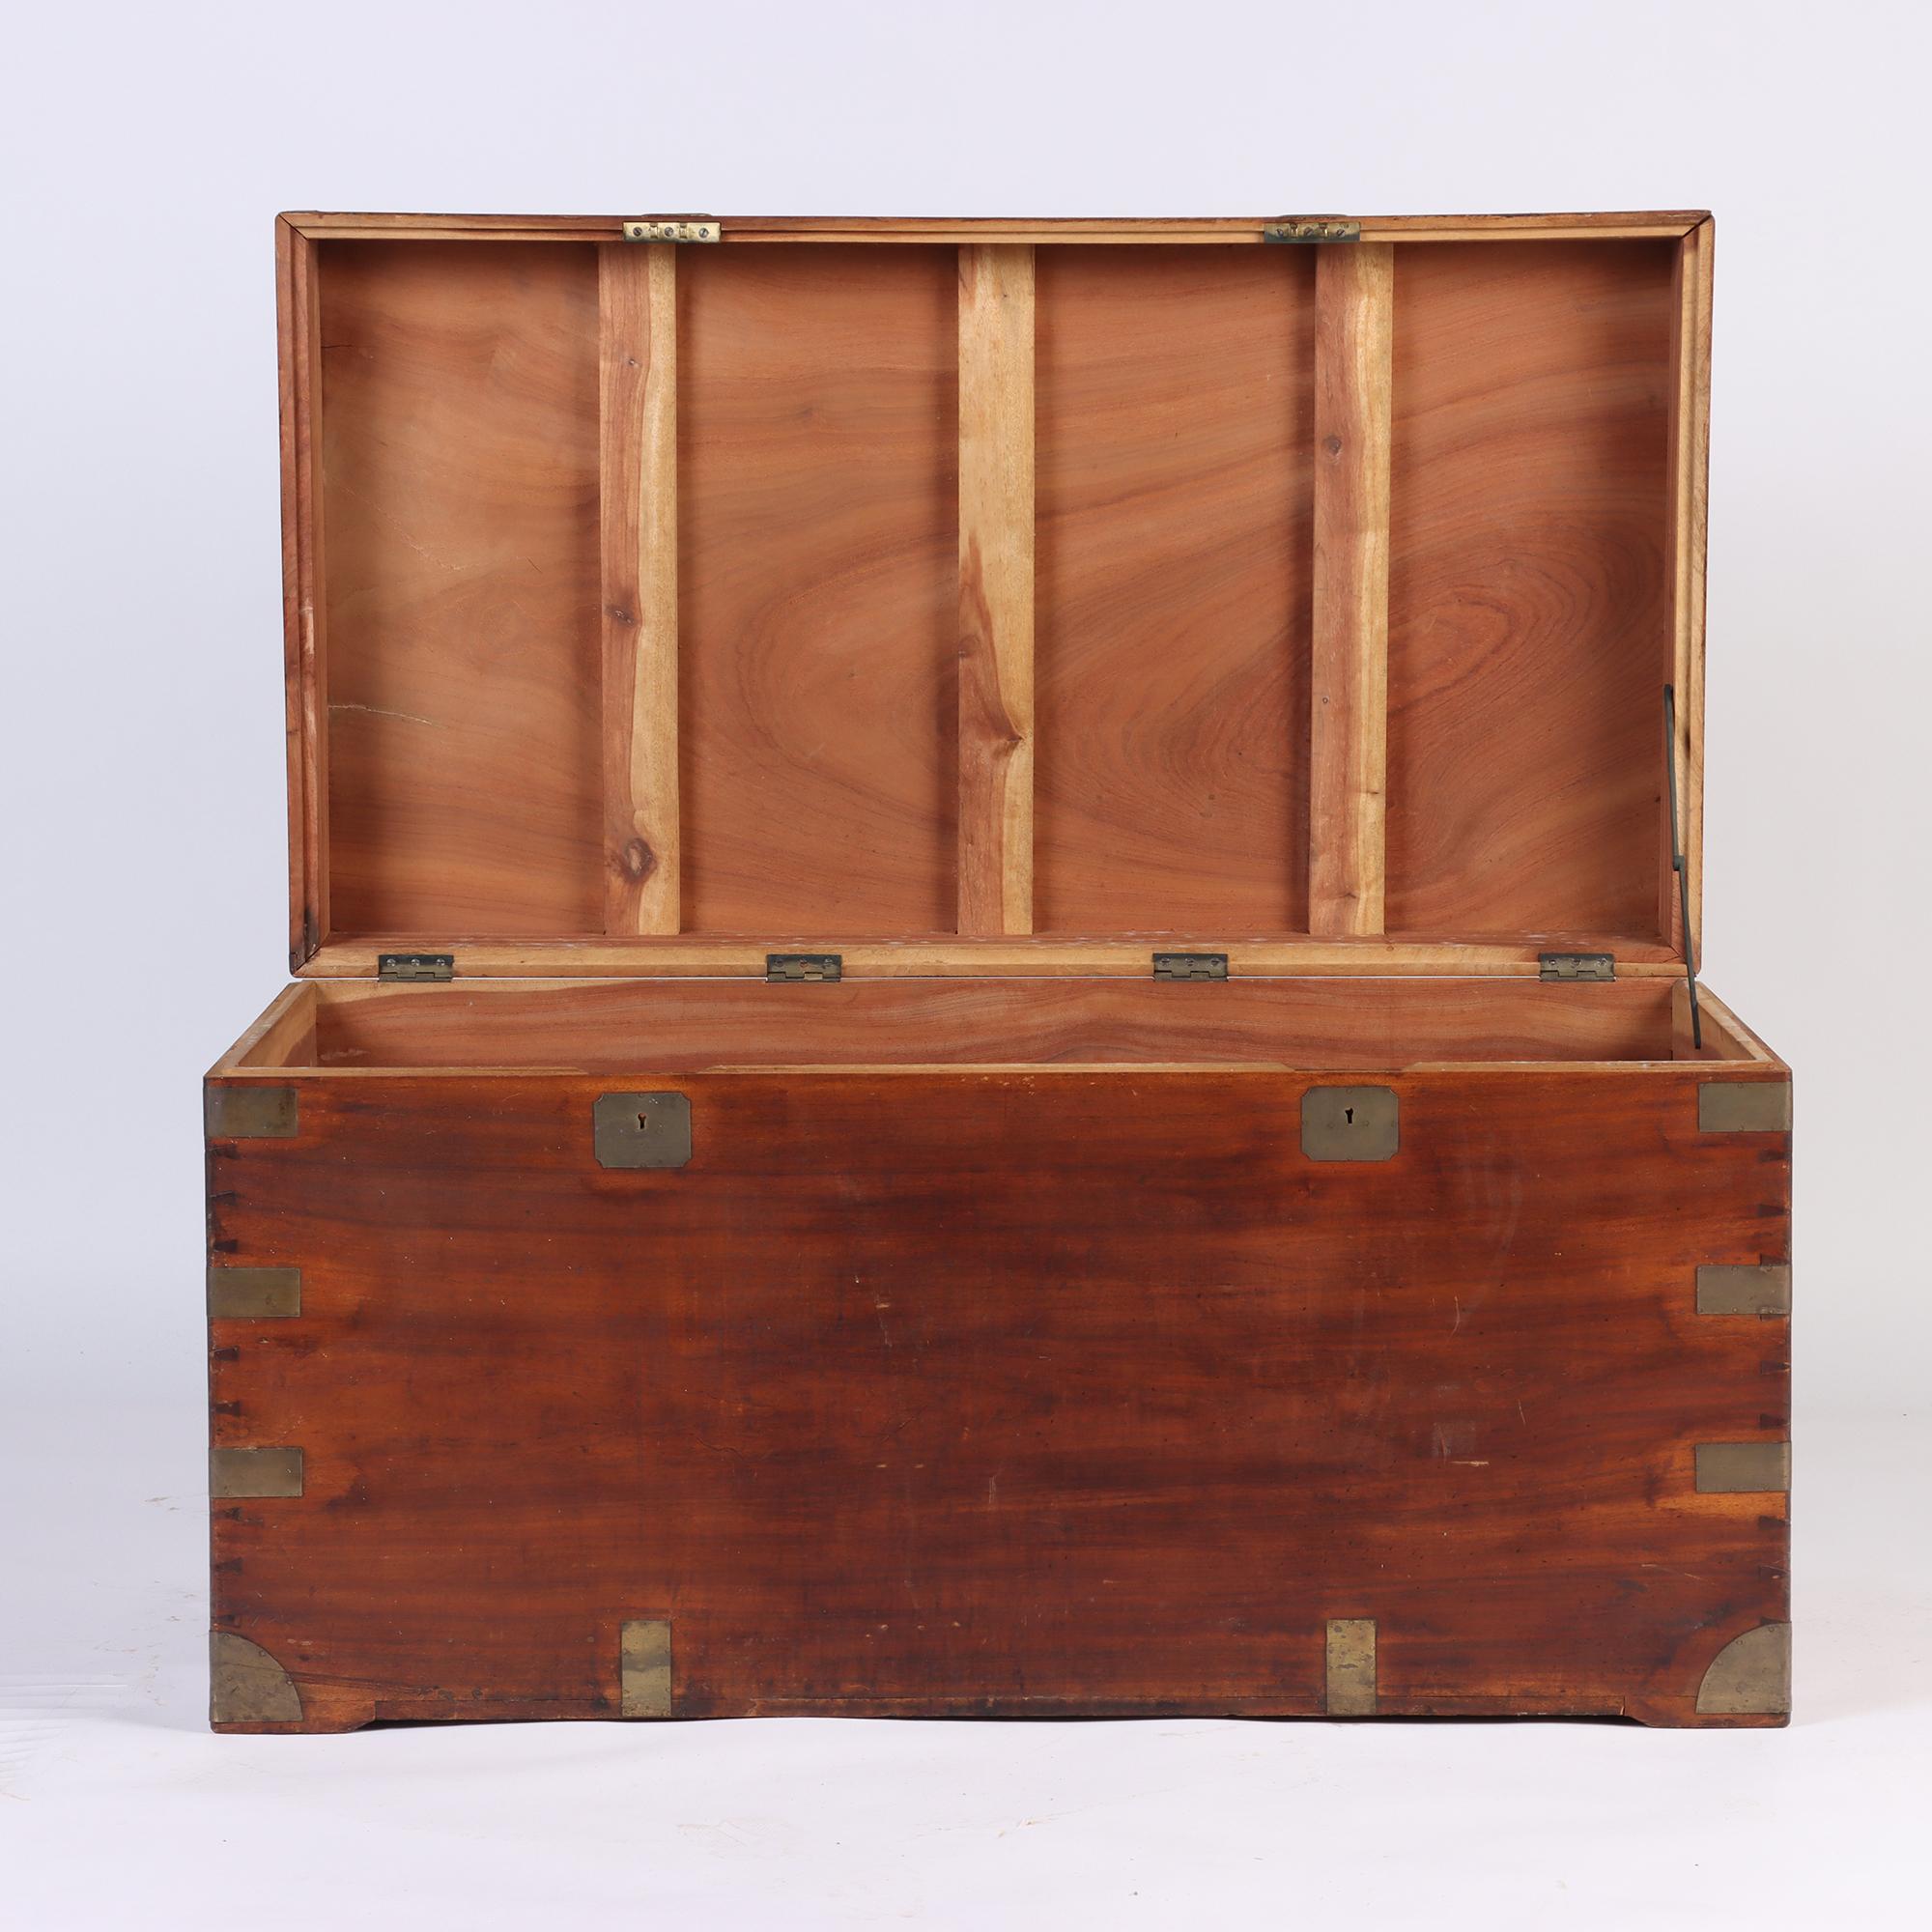 Brass Large Marine Chest / Campaign Chest in Camphor Wood from the 19th Century For Sale